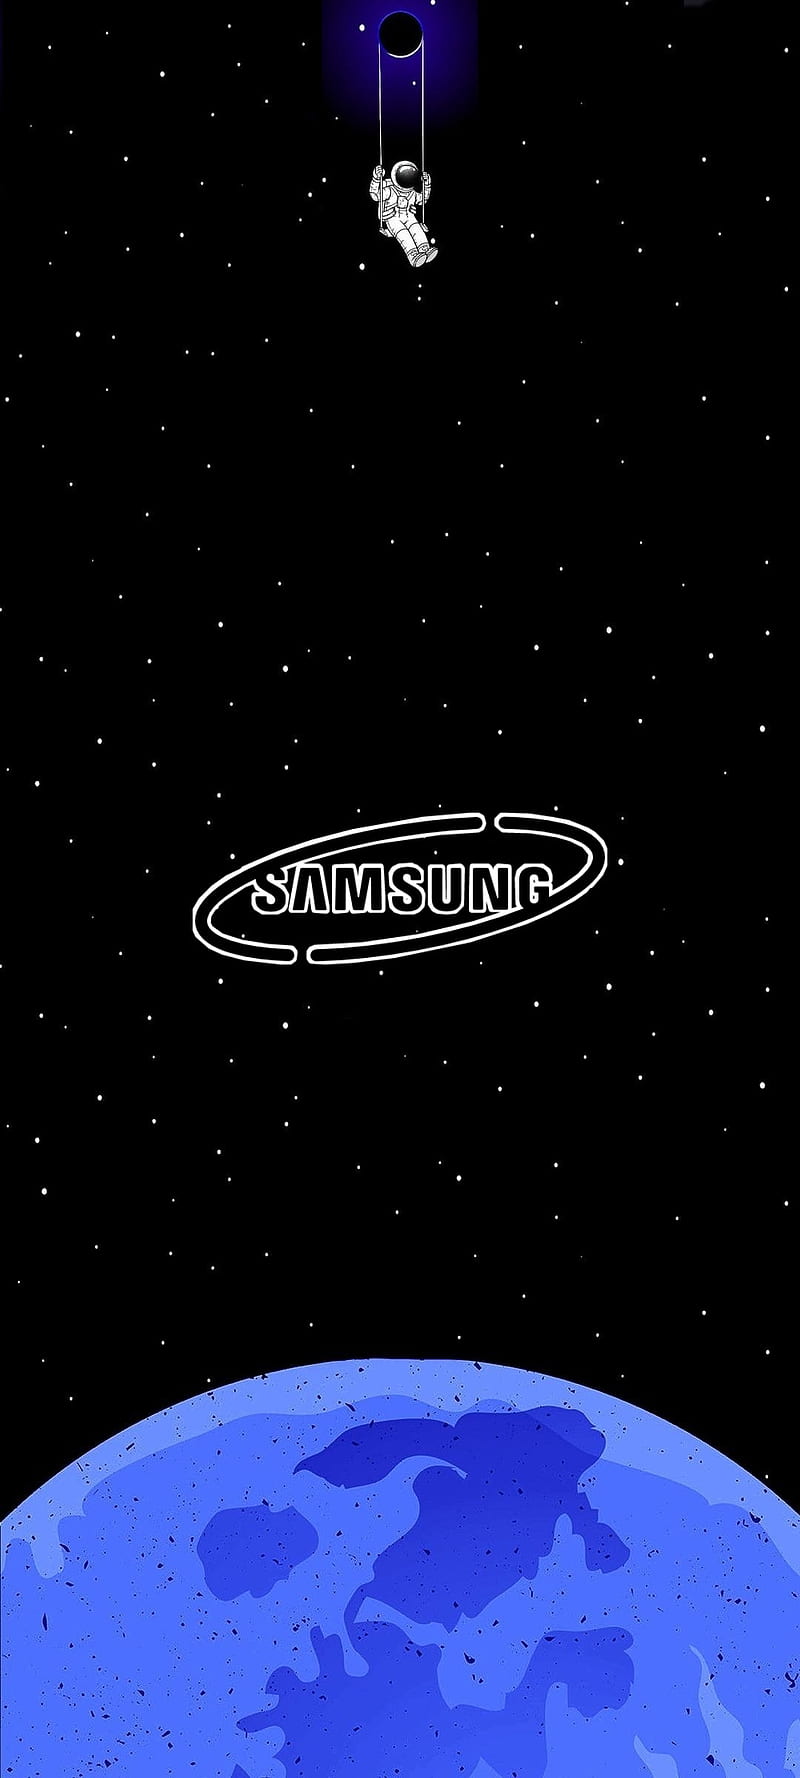 Samsung S21, S21 Ultra, Android, S21+, HD phone wallpaper